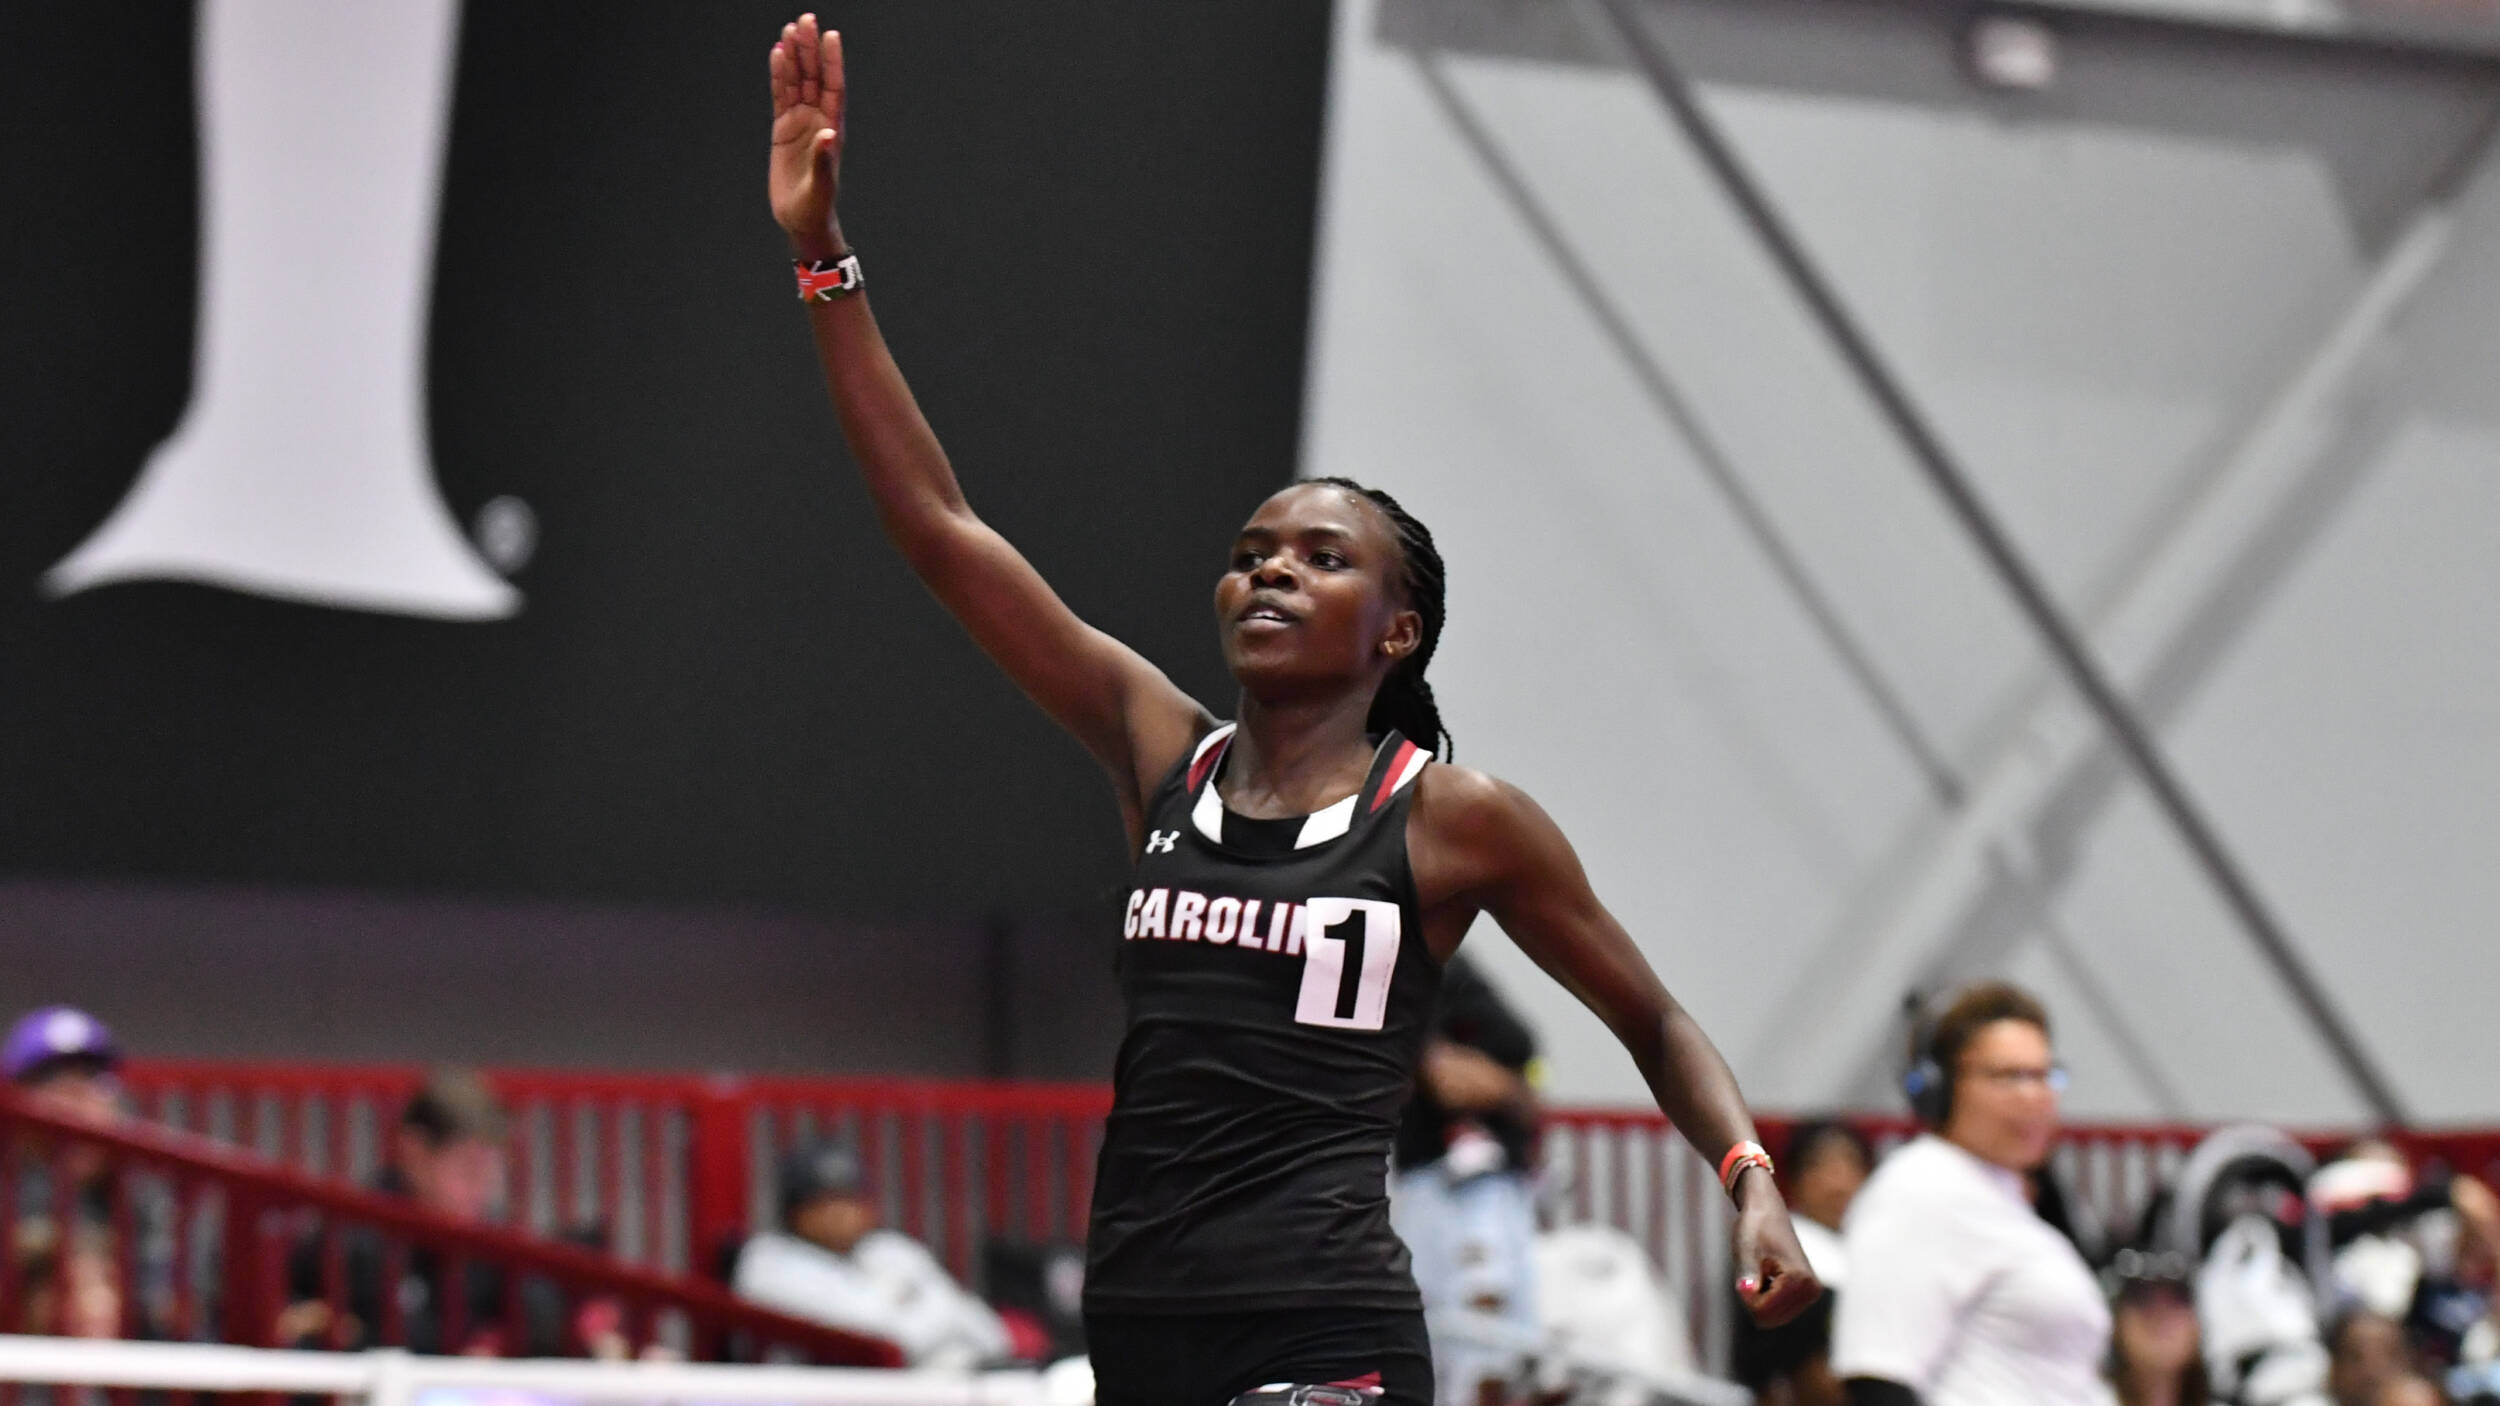 Gamecocks Conclude Third Home Indoor Meet of the Season